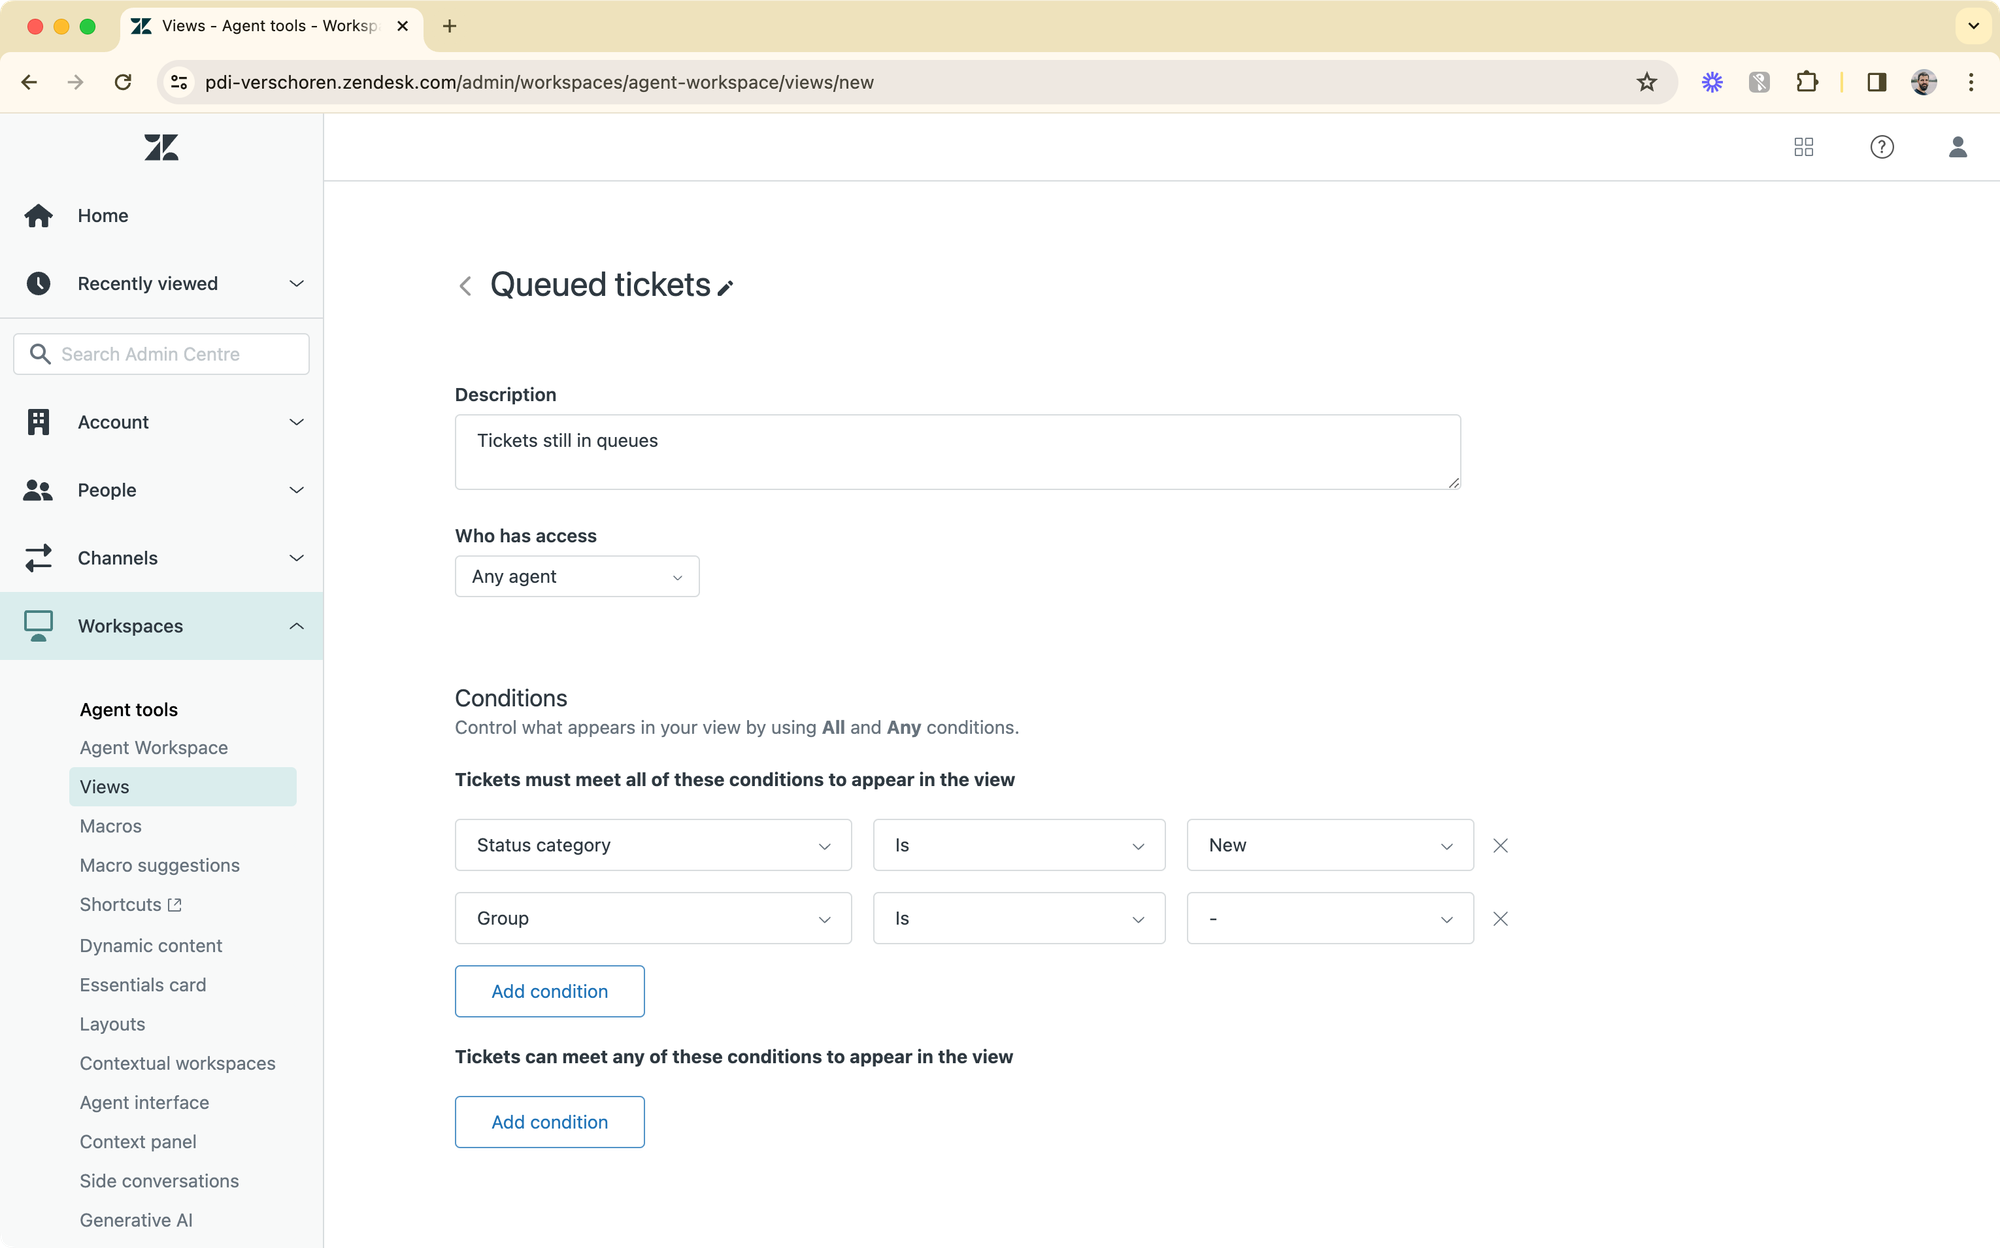 Beyond triggers. Moving to queue only assignment in Zendesk